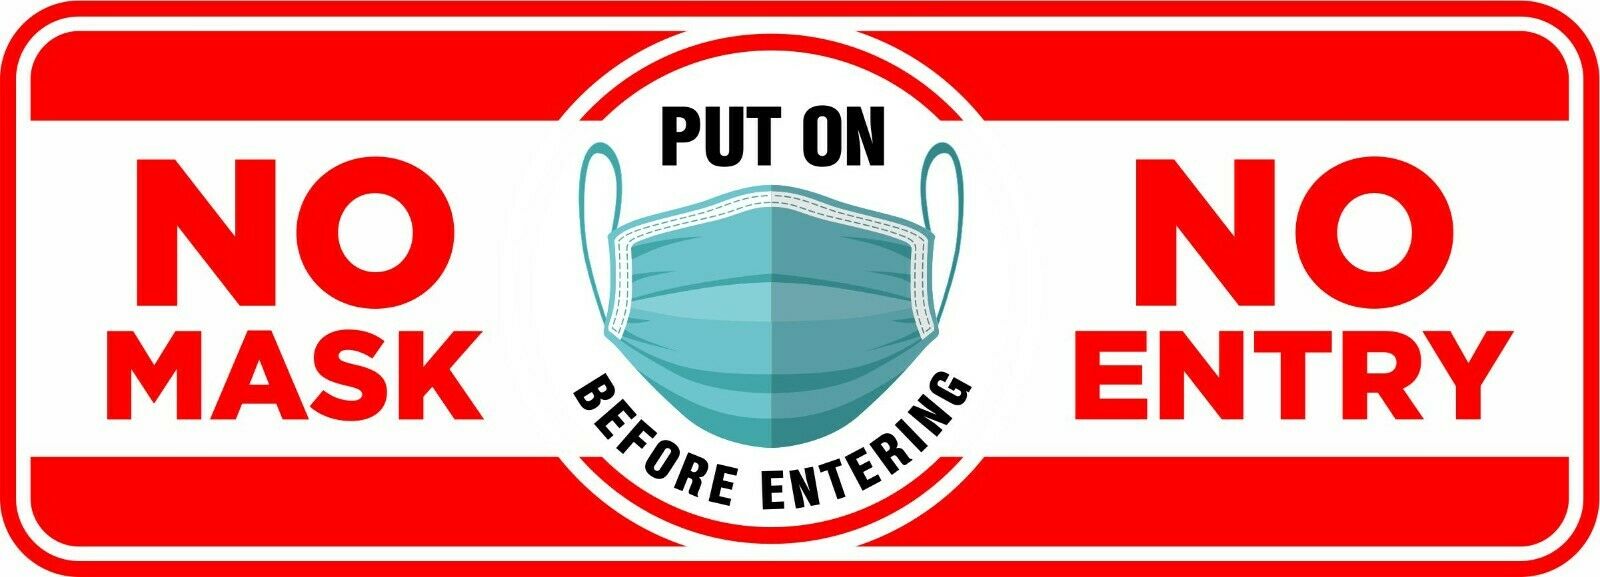 Warning Face Mask Required No Mask No Entry 8" x 3" UV Laminated Window Decal - Powercall Sirens LLC